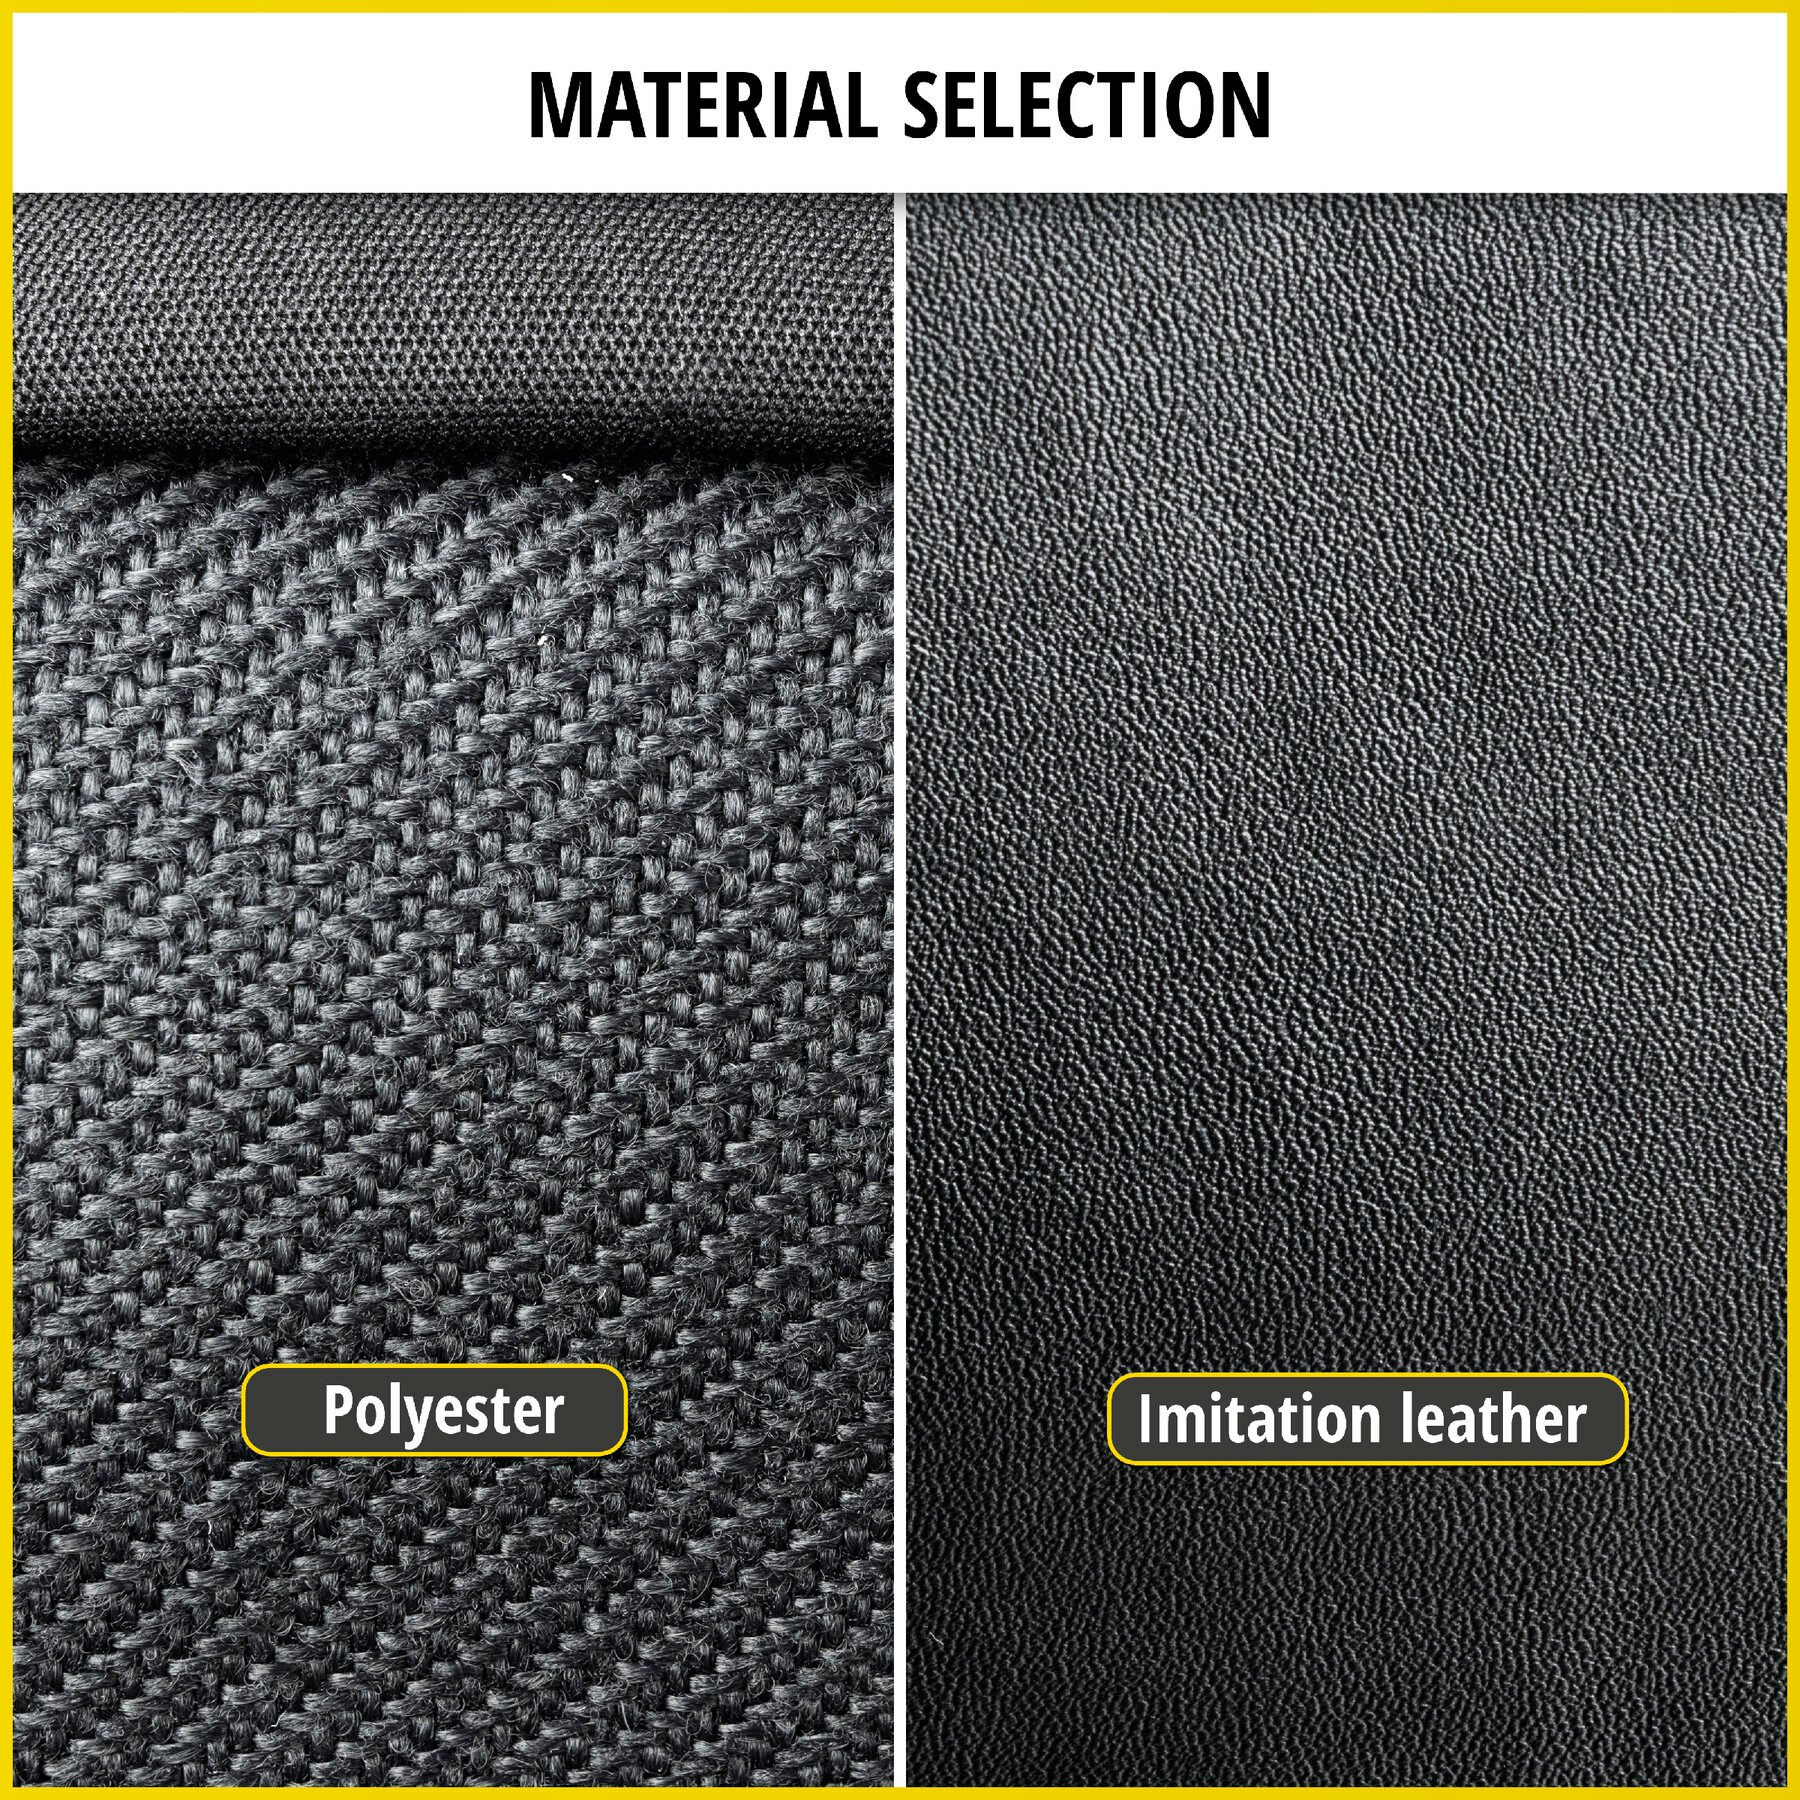 Seat cover made of imitation leather for VW T5, single seat cover front